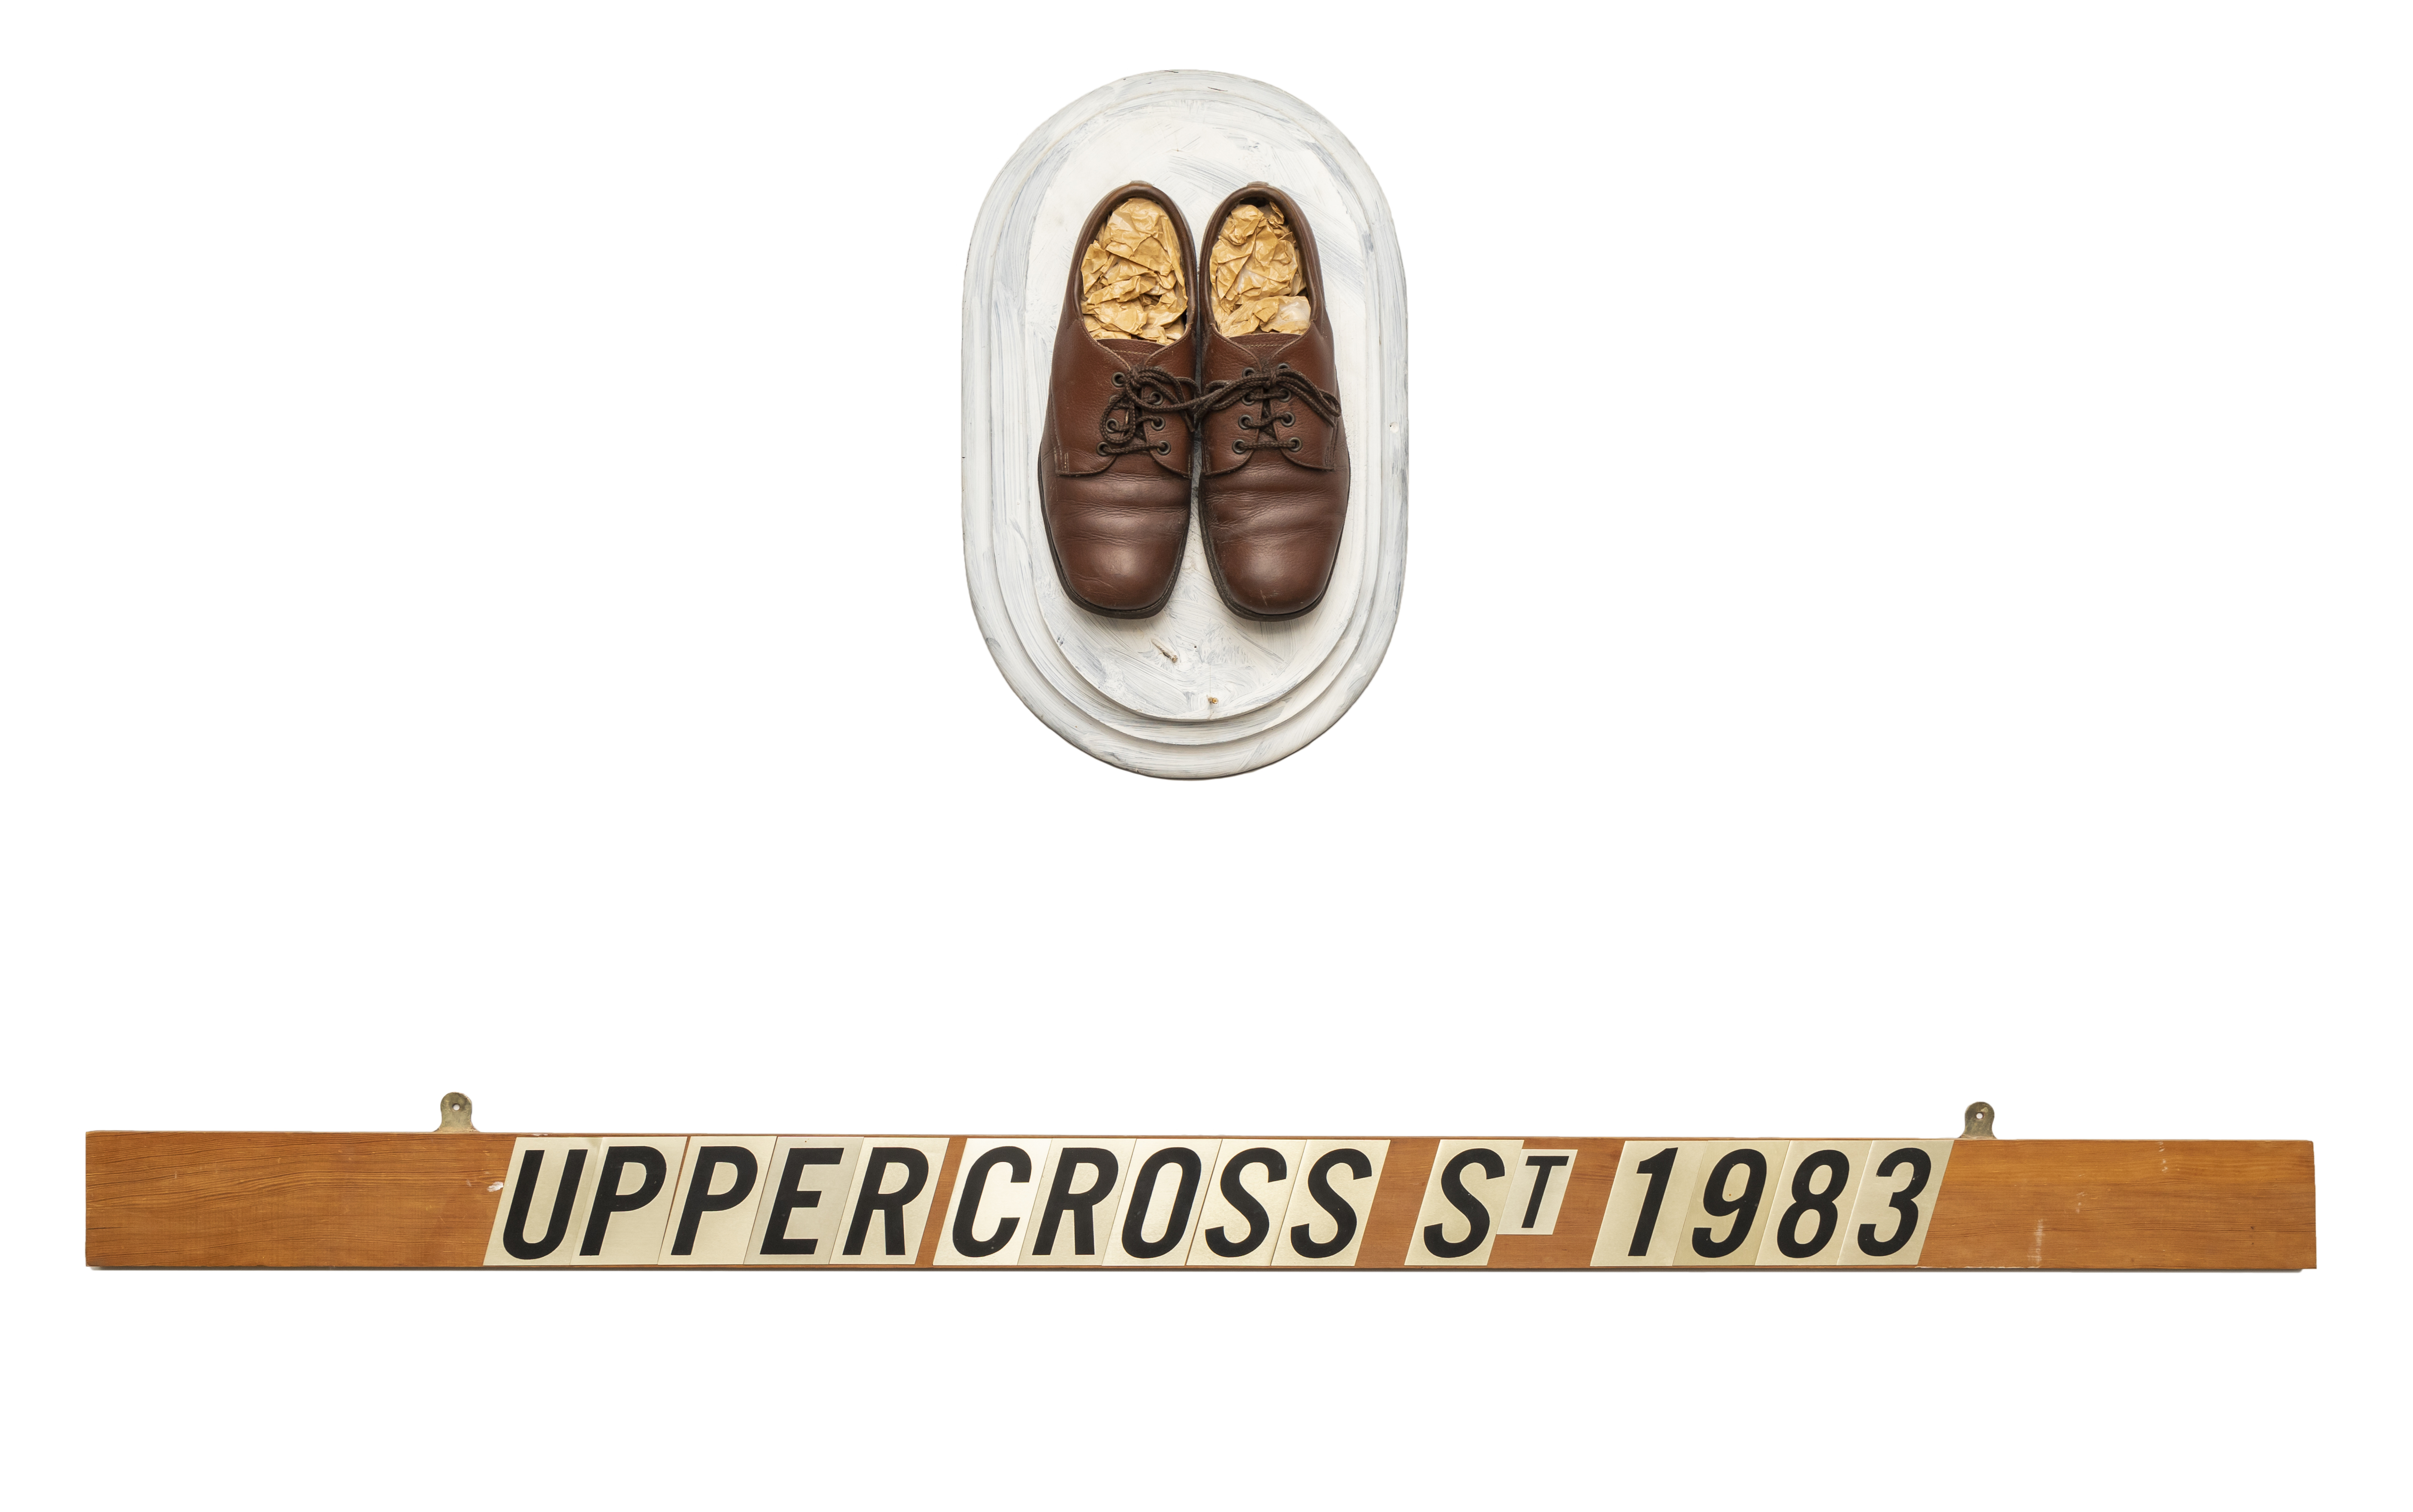 A pair of brown leather dress shoes on white wooden mount. Below the shoes is a wooden plank with lettering that reads 'Upper Cross St 1983'.